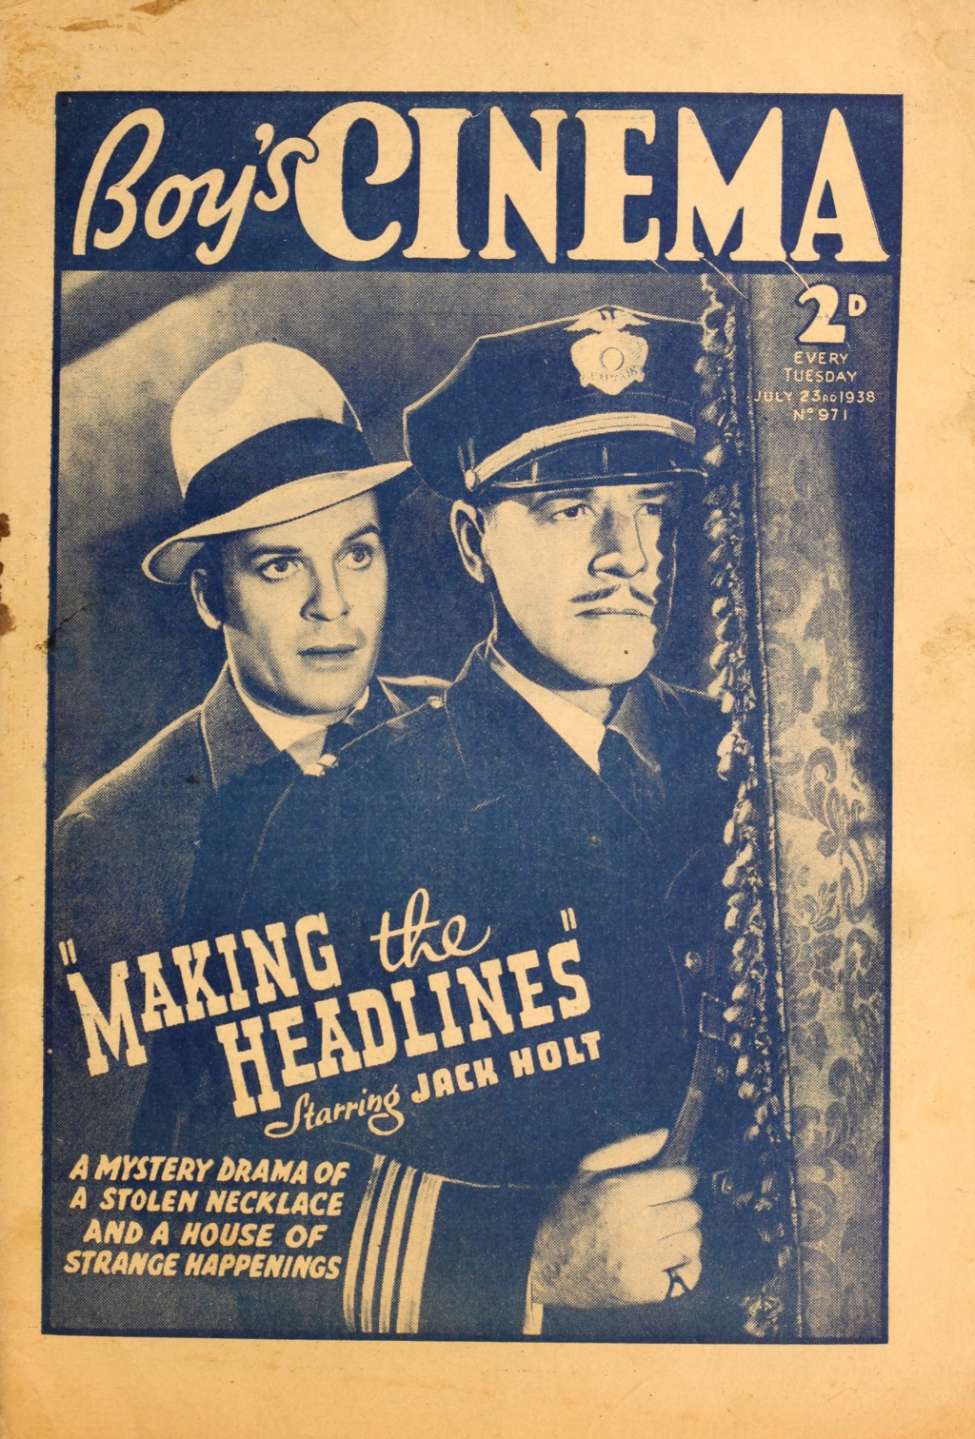 Comic Book Cover For Boy's Cinema 971 - Making the Headlines - Jack Holt